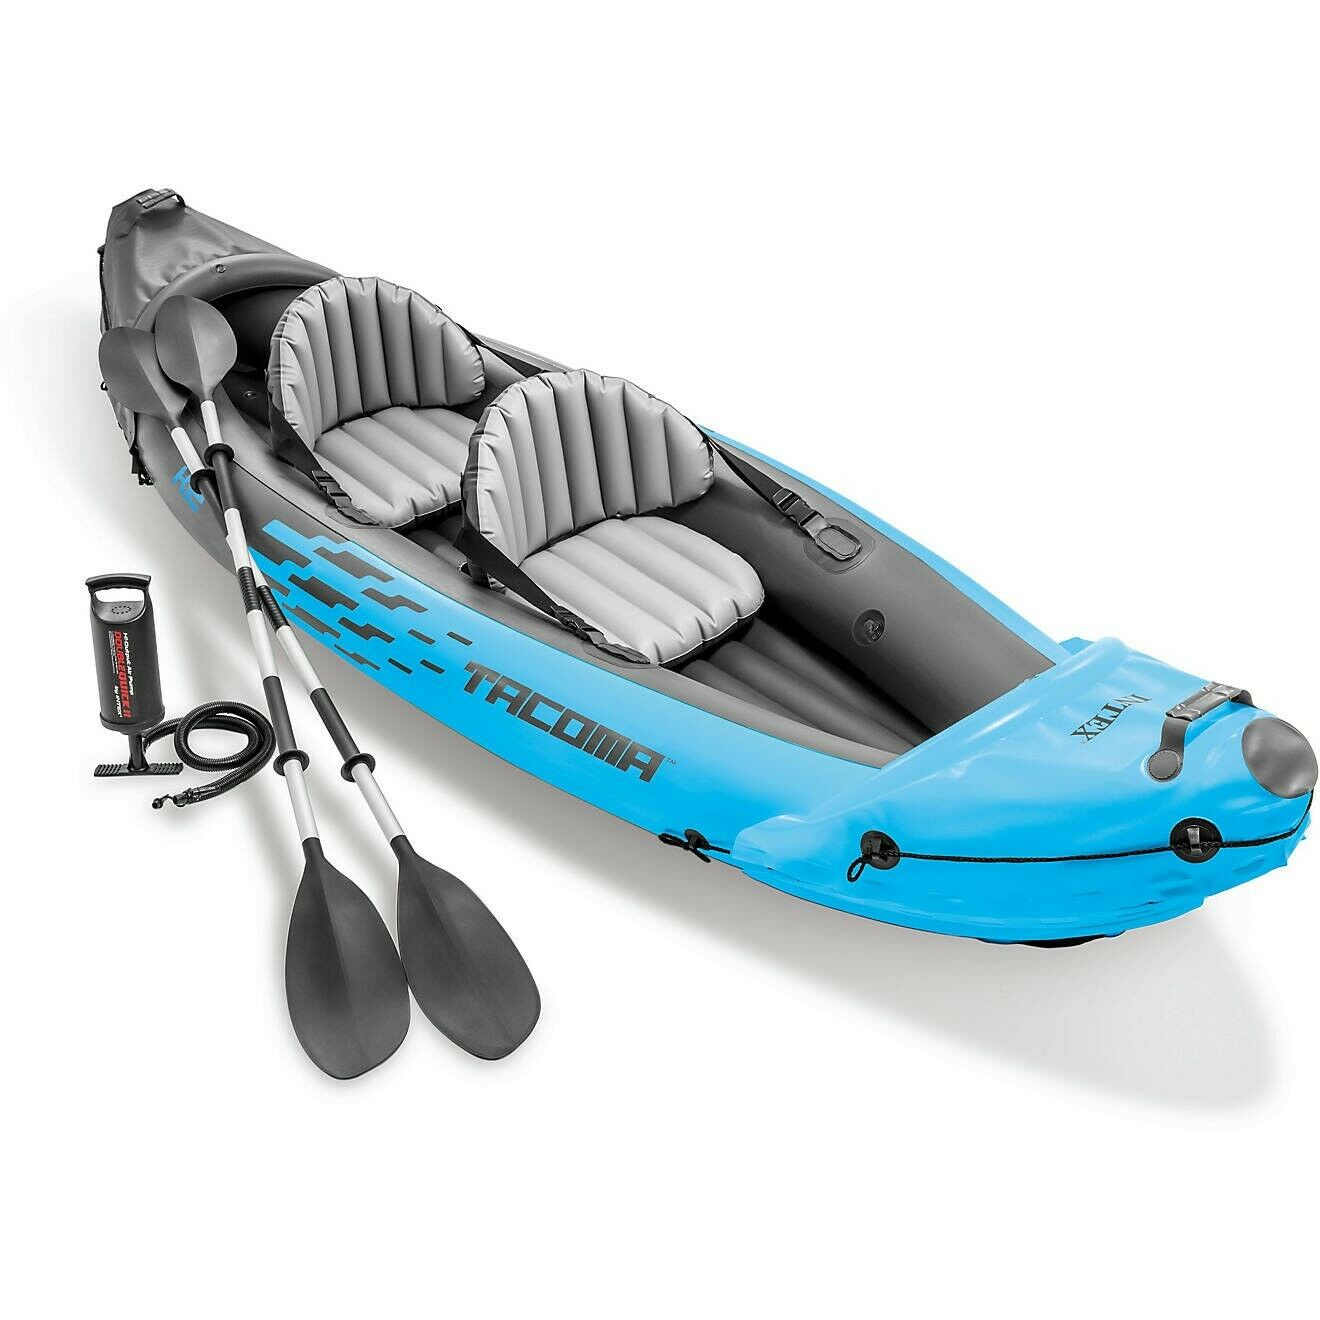 INTEX Sport Series Tacoma K2 10 ft 3 in Inflatable Kayak NEW FREE SHIPPING